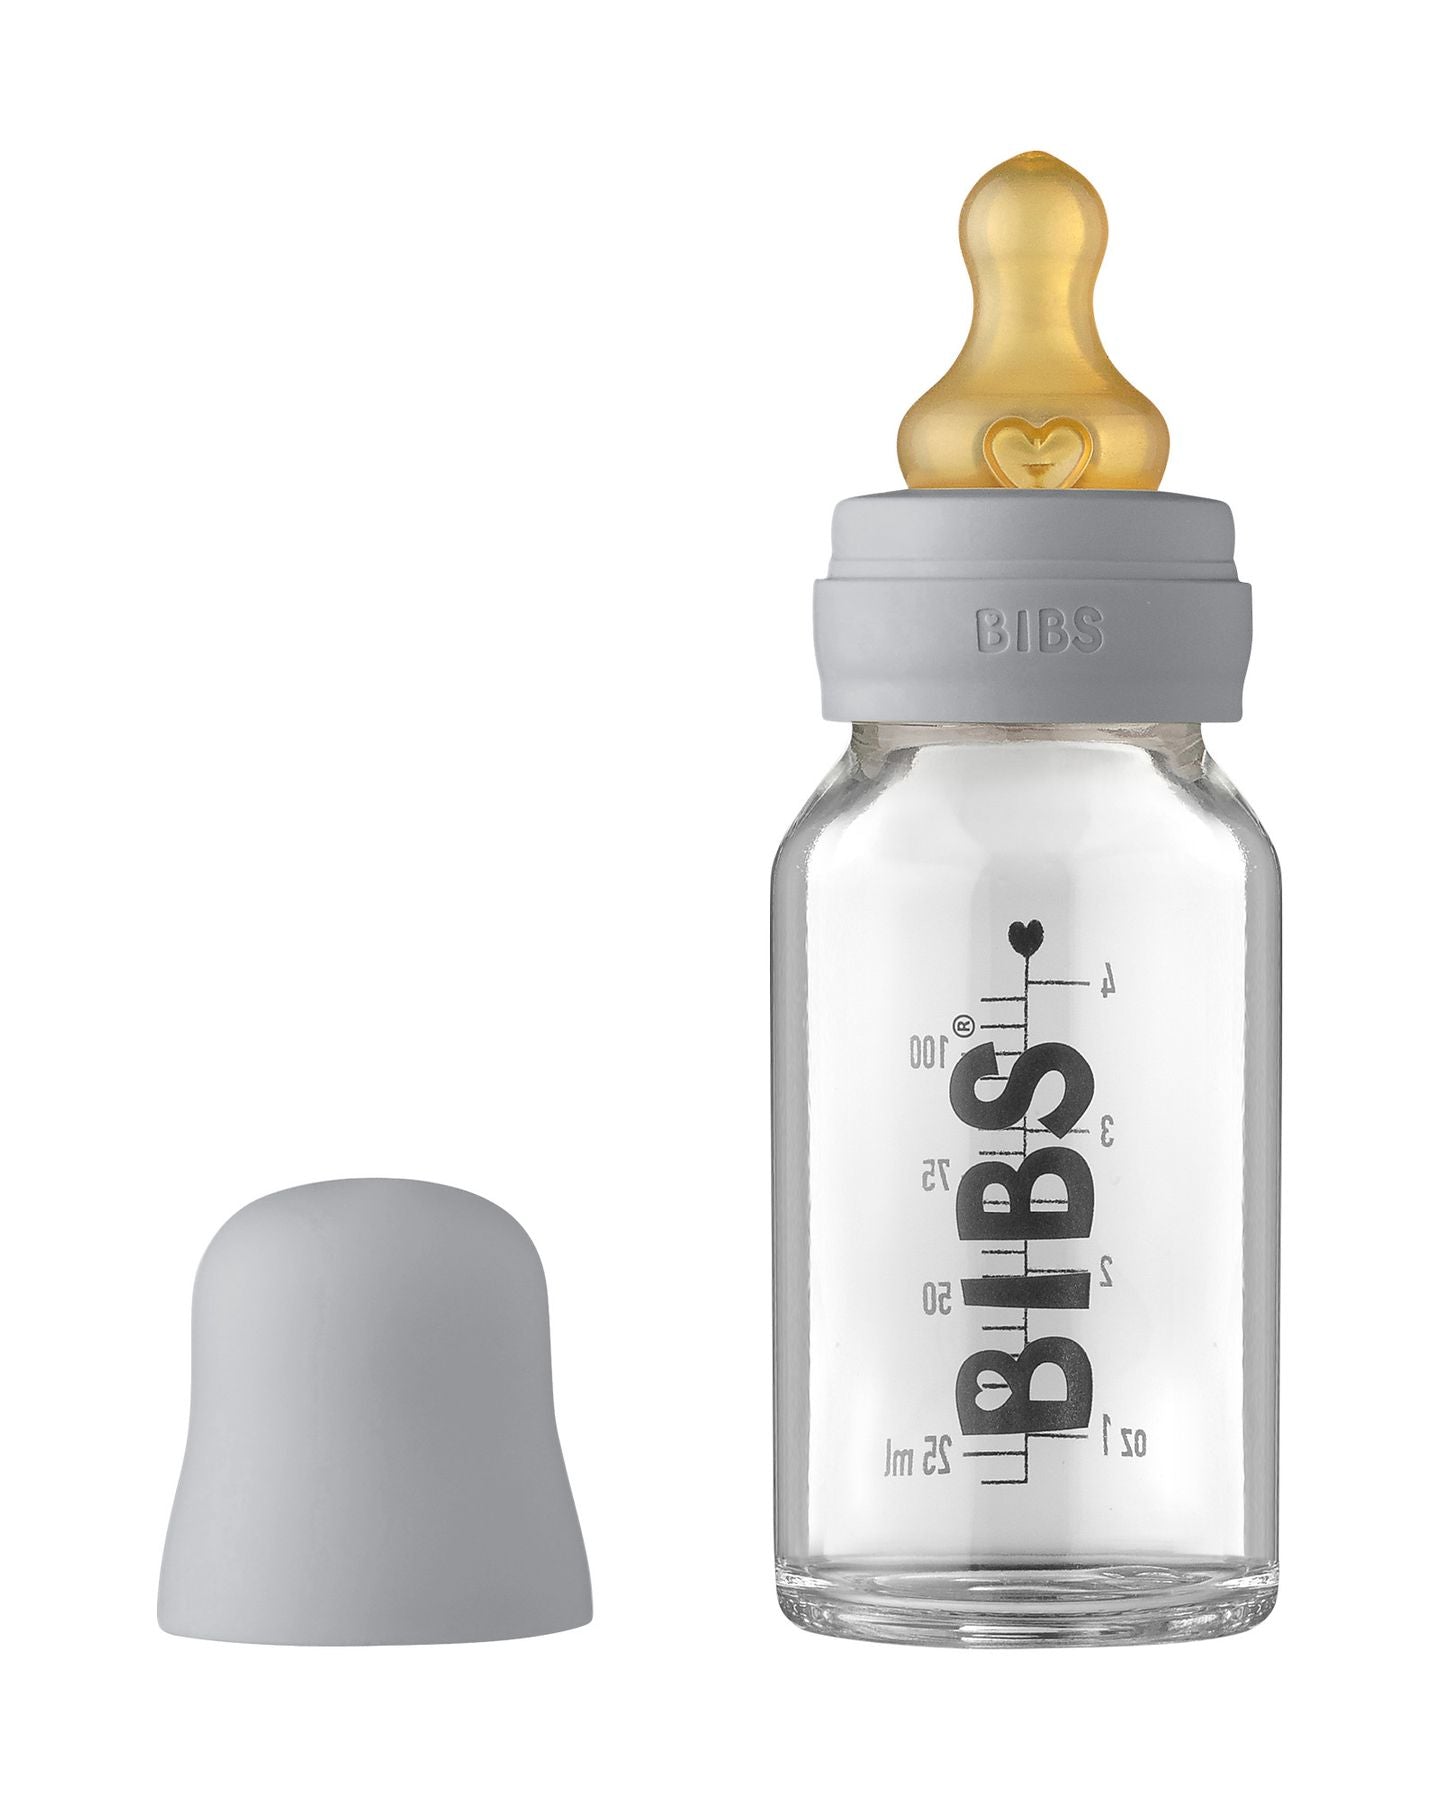 Complete Glass Baby Bottle Set - Nuvola - 5013223